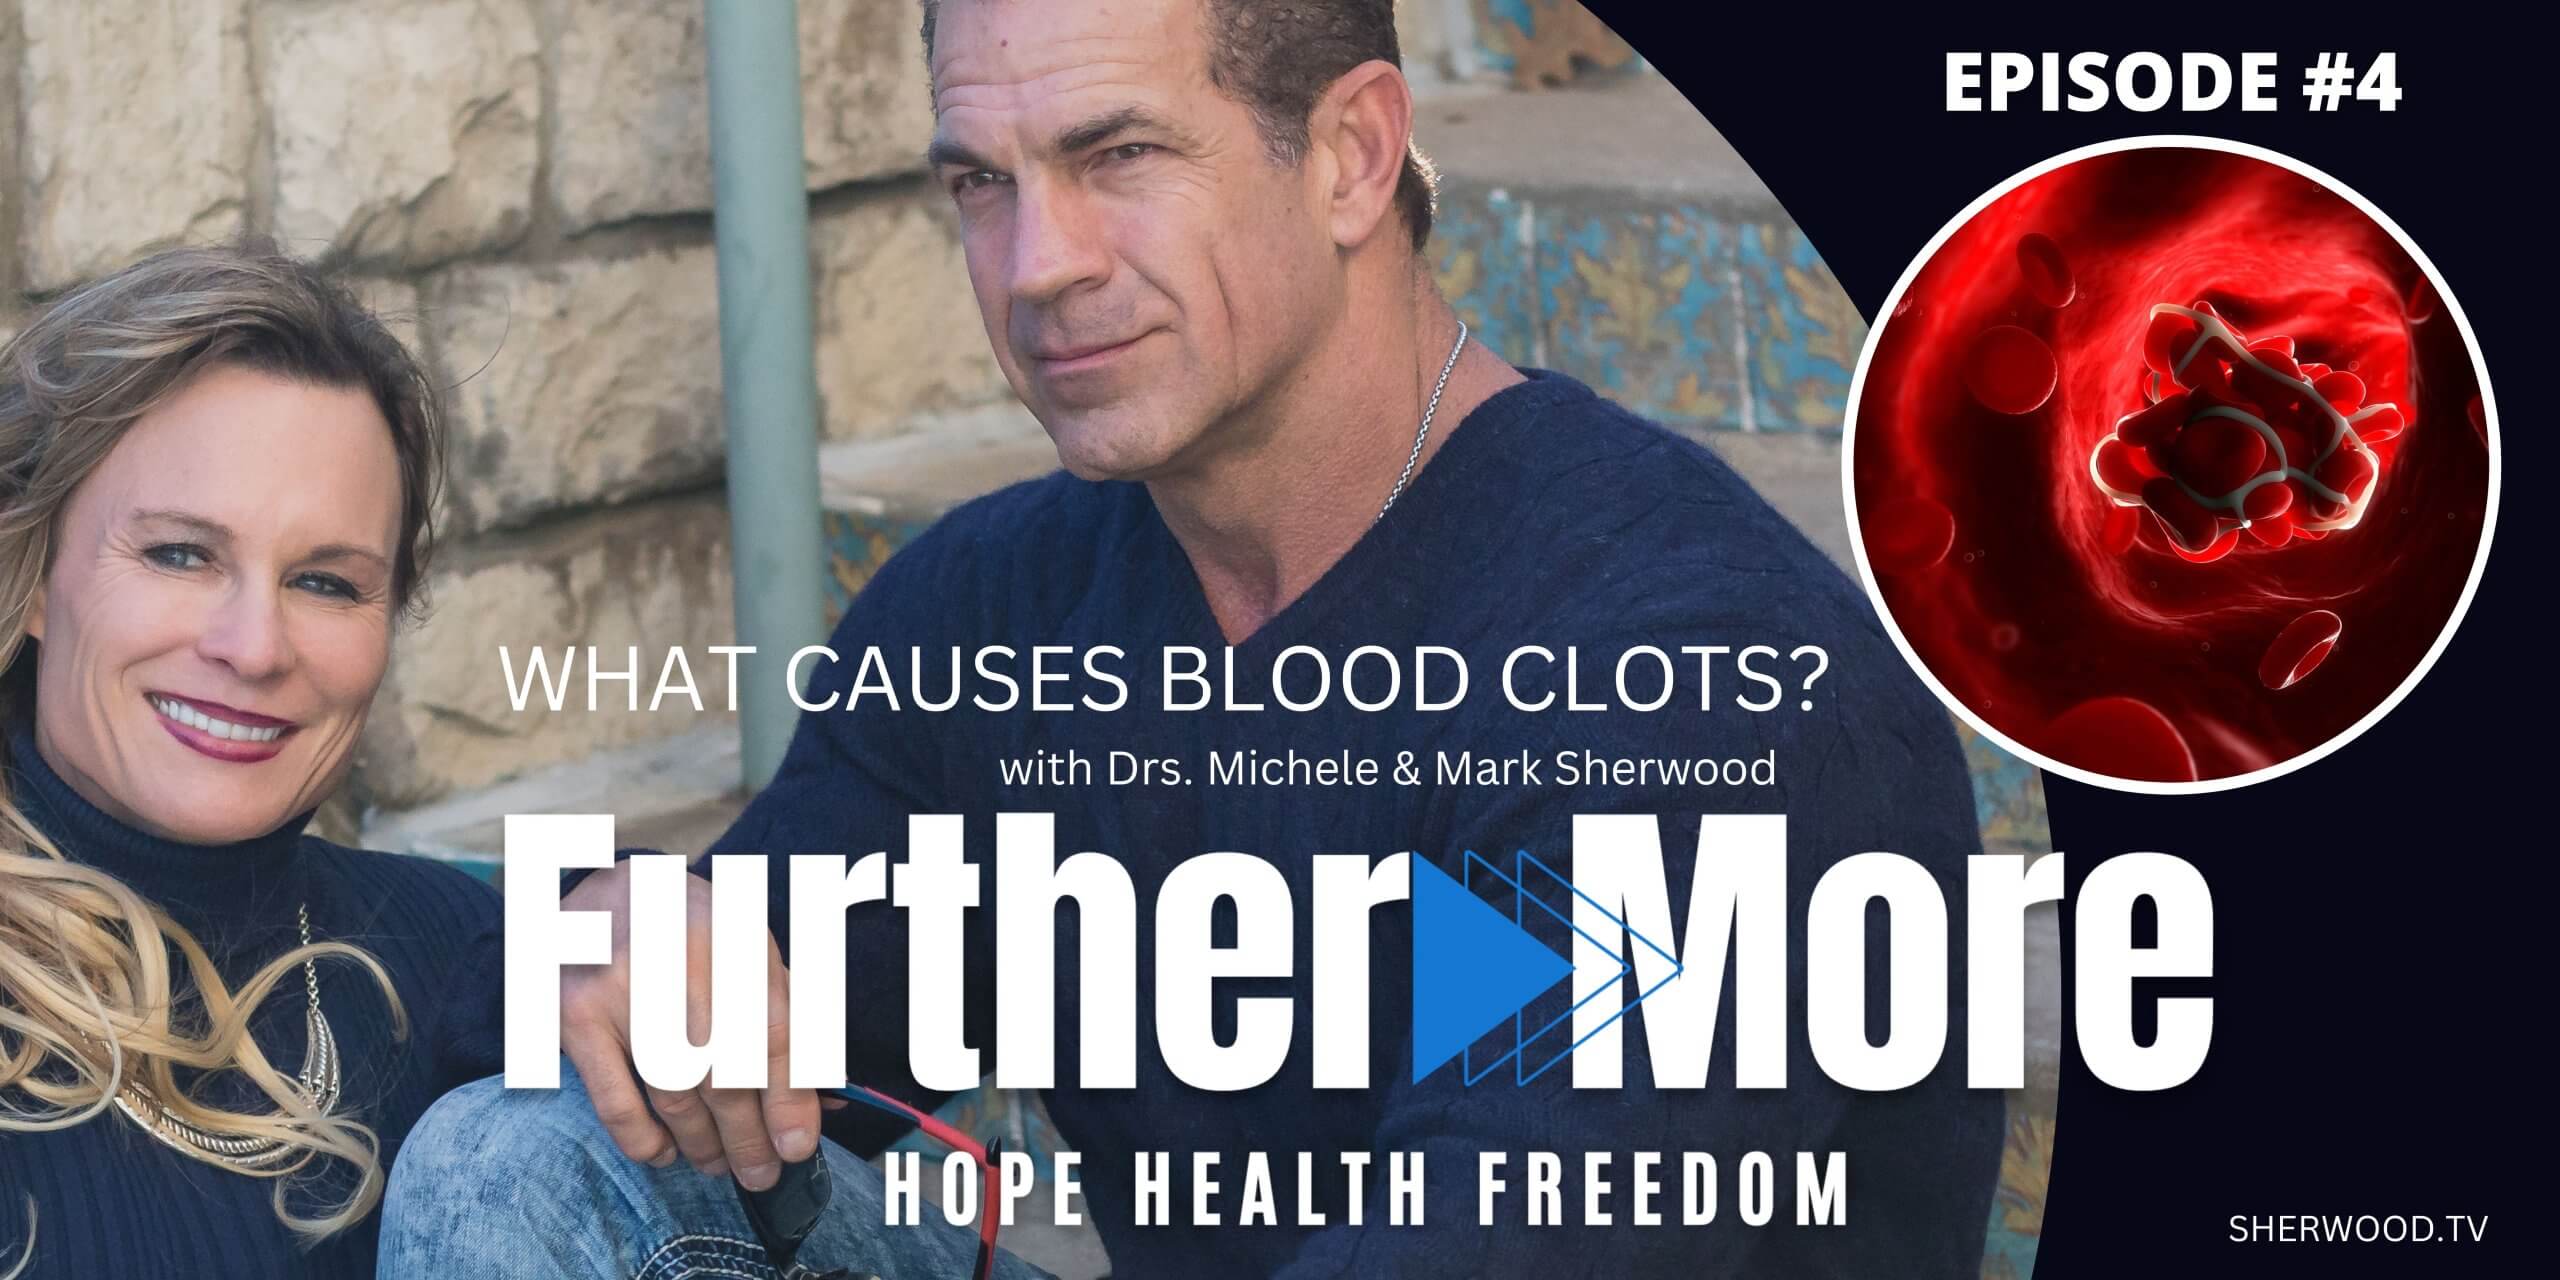 What causes blood clots? | FurtherMore Ep 04